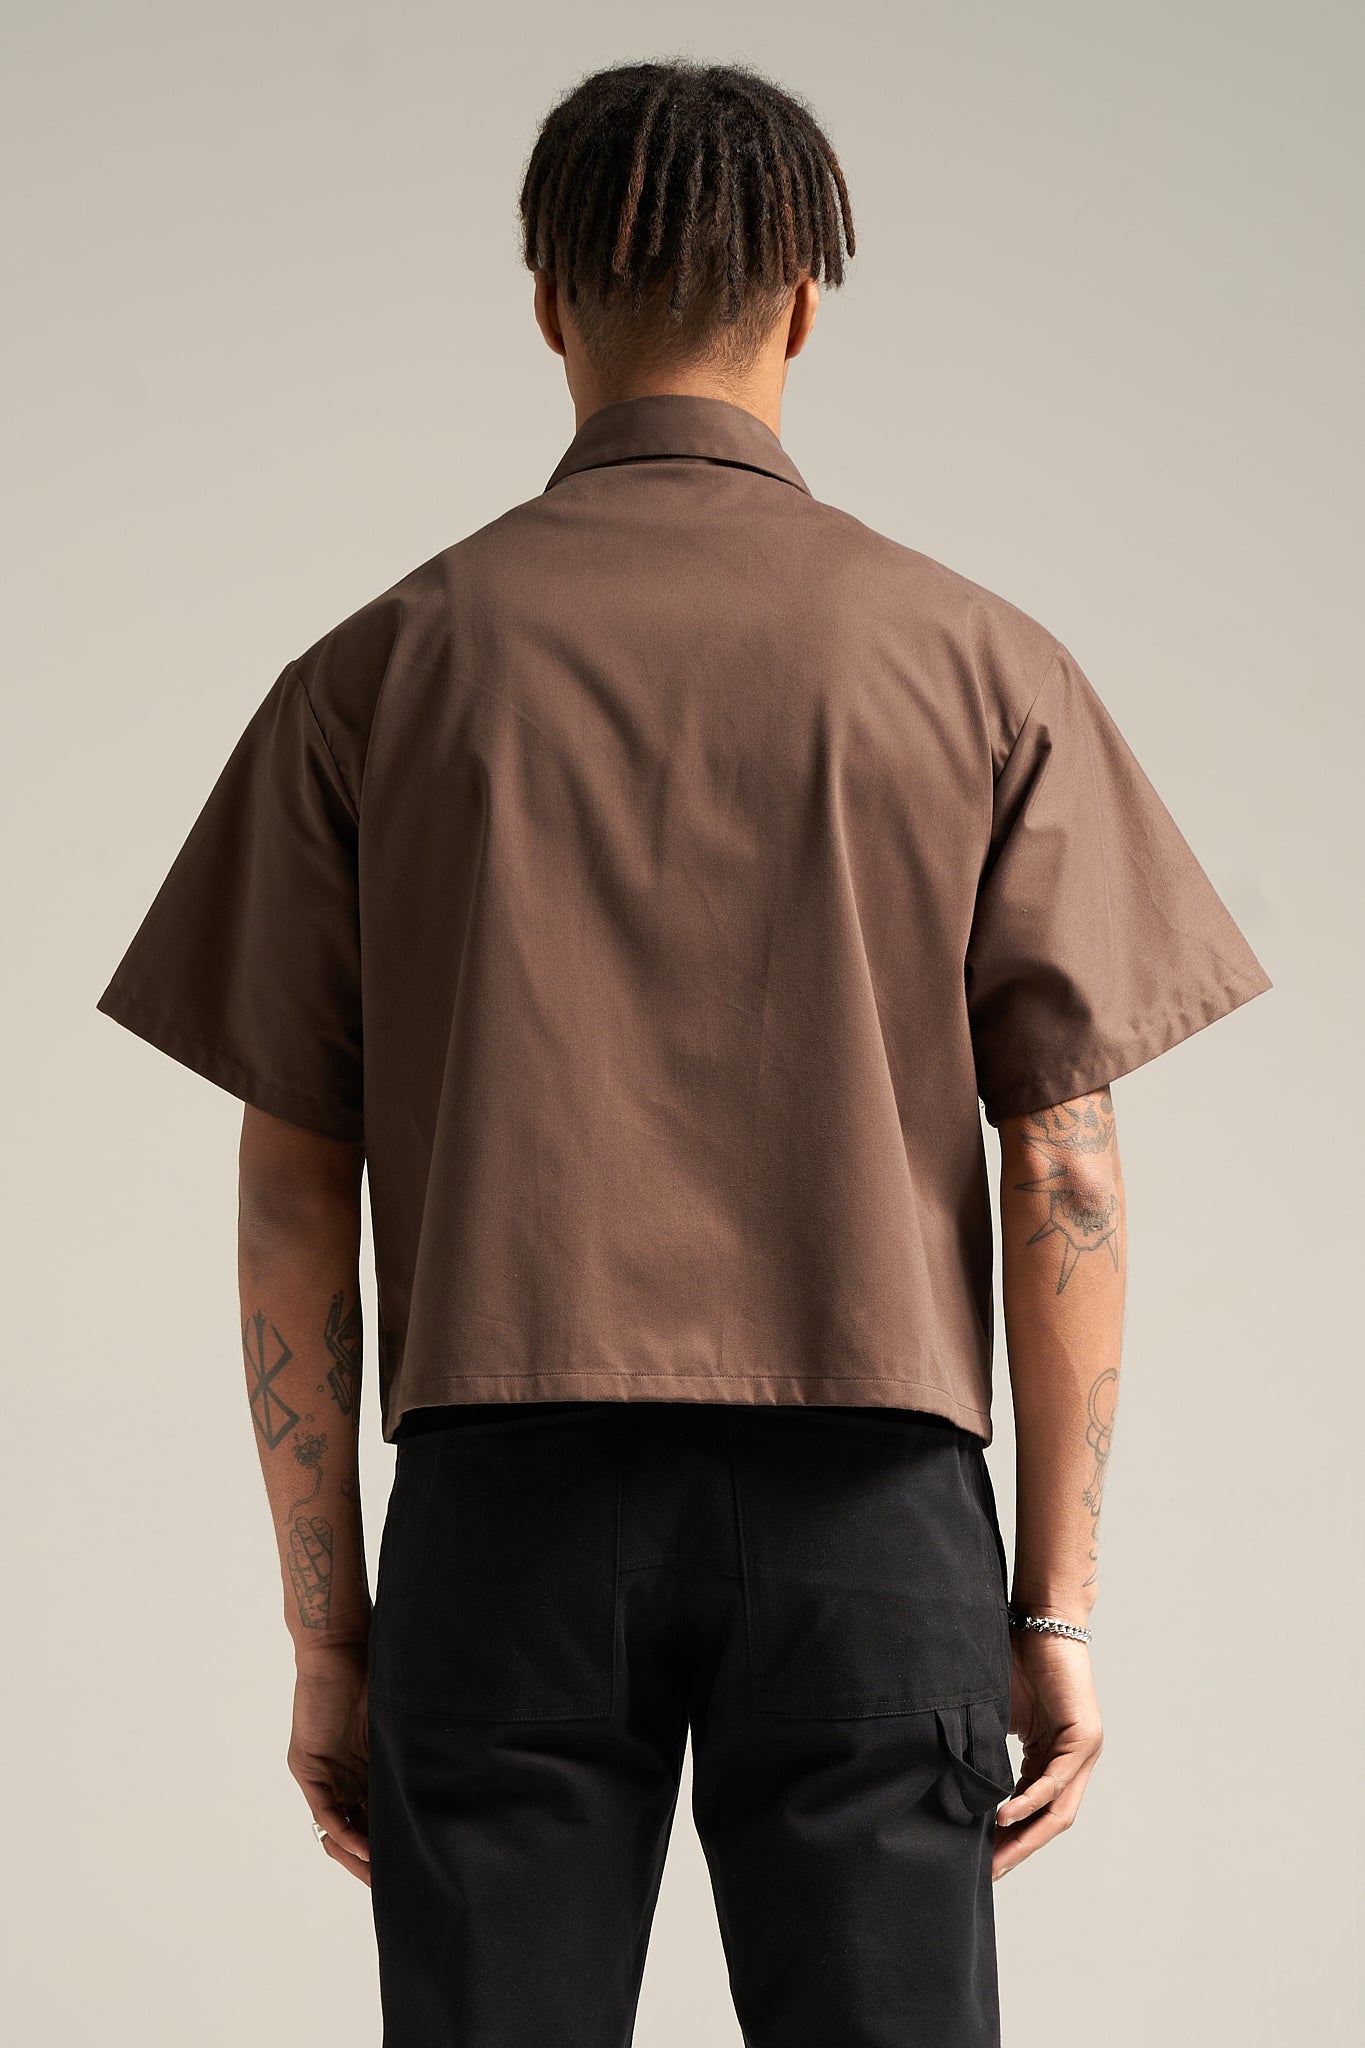 The Cocoa Bowling Shirt